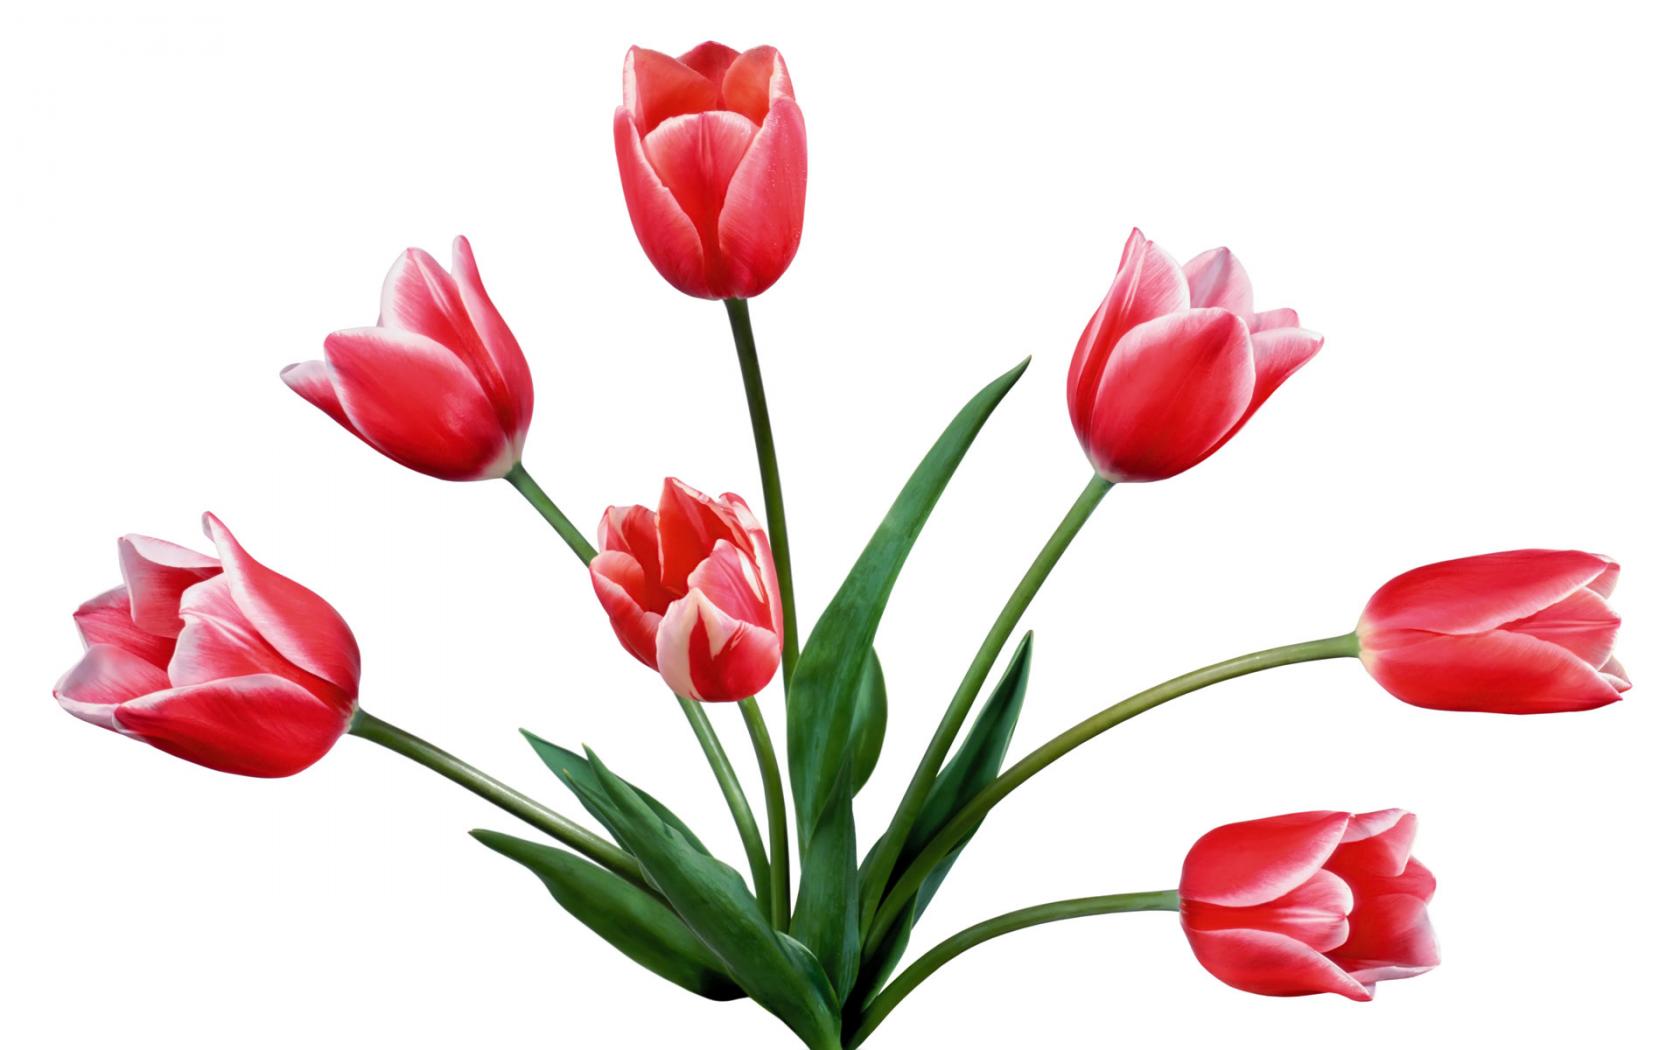 Tulip Drawing 14136 Hd Wallpapers in Flowers - Imagesci.